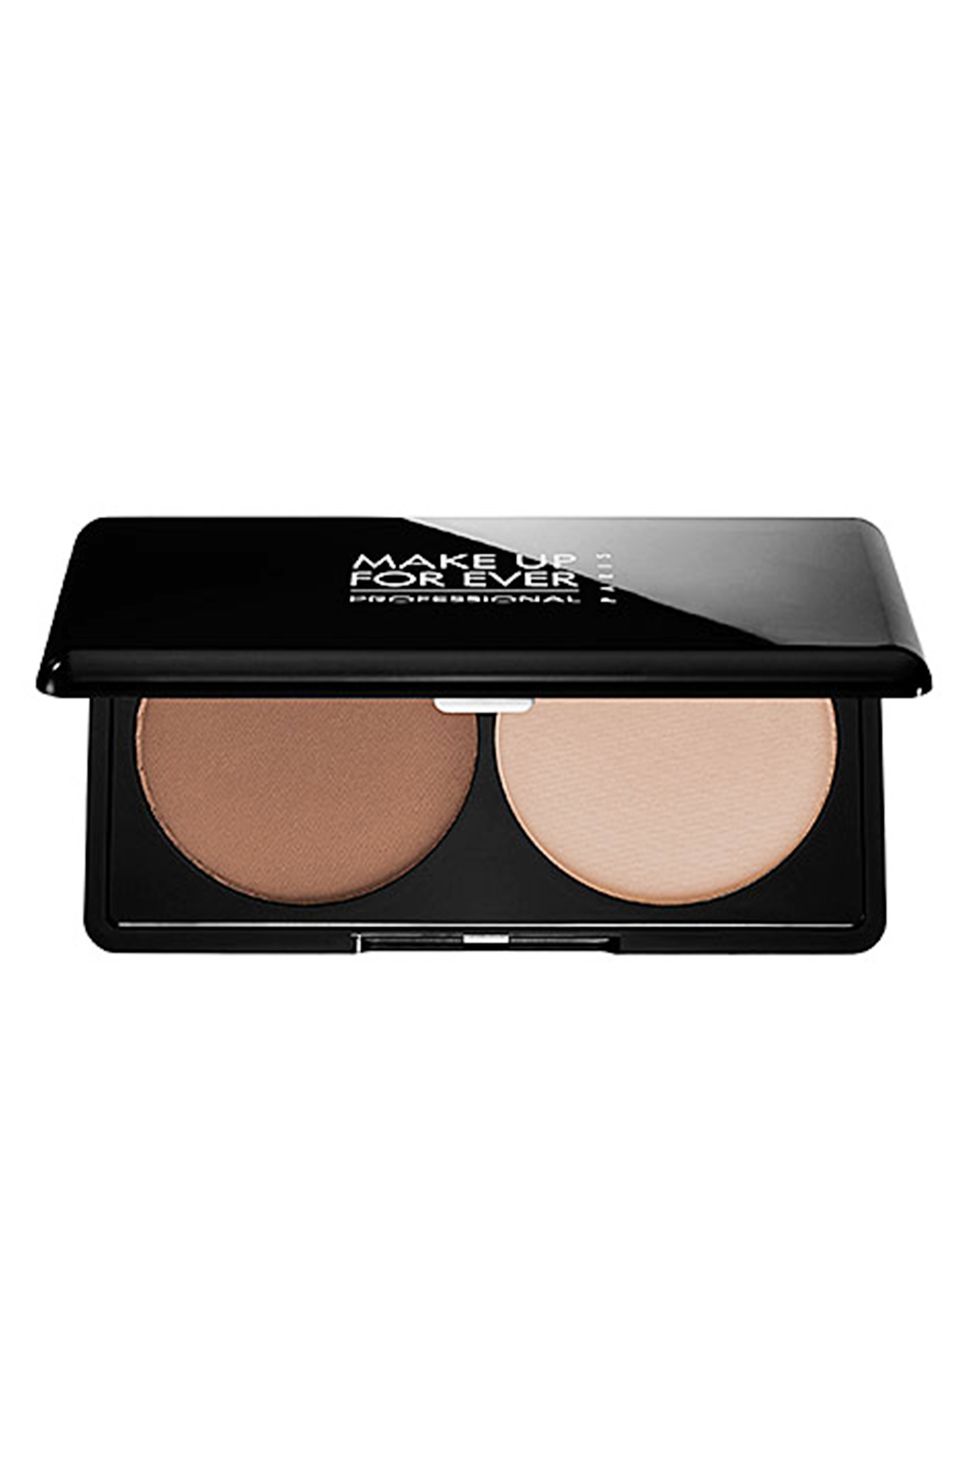 <p>With four different palettes to choose from in a wide range of shades, Make Up For Ever's Sculpting Kit is a must have in makeup artist Melanie Inglessis' kit. "They're sheer and blend well, but they're also strongly pigmented."</p><p>Make Up For Ever Sculpting Kit, $48, <a href="http://www.sephora.com/sculpting-kit-P386662"><u data-redactor-tag="u">Sephora.com</u></a></p>